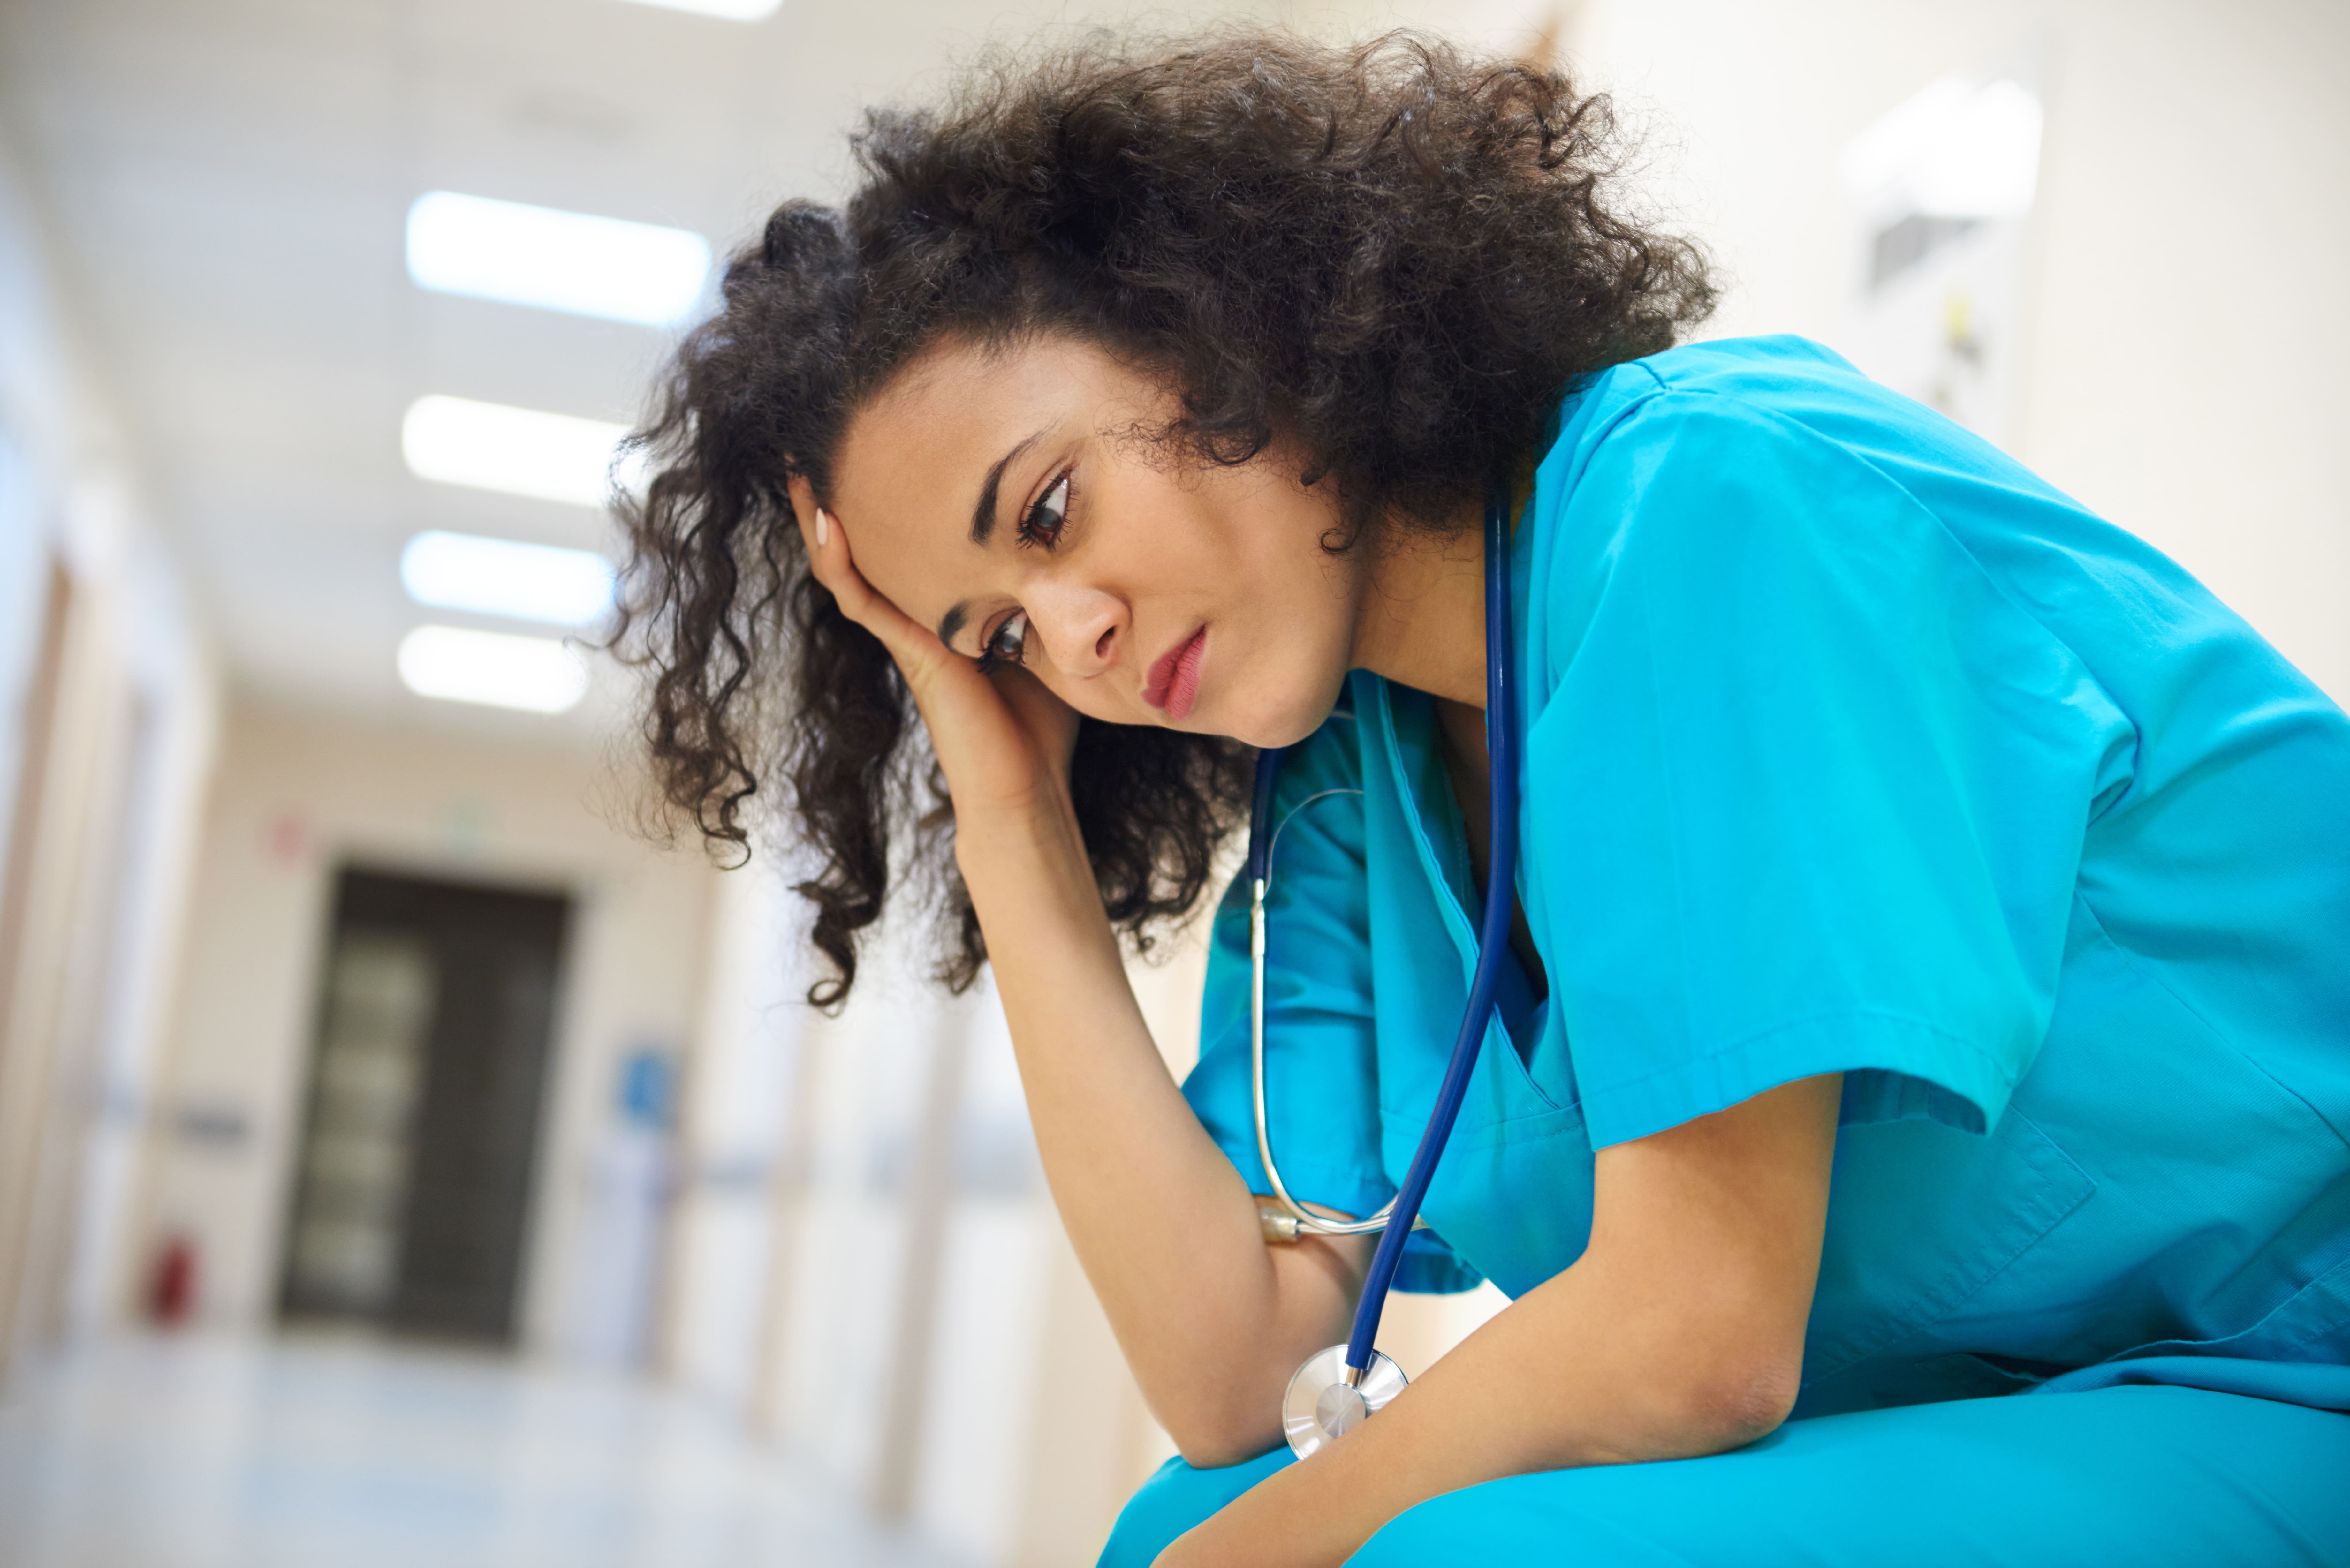 Physician-Burnout-A-Growing-Medical-Crisis-in-the-USA.php